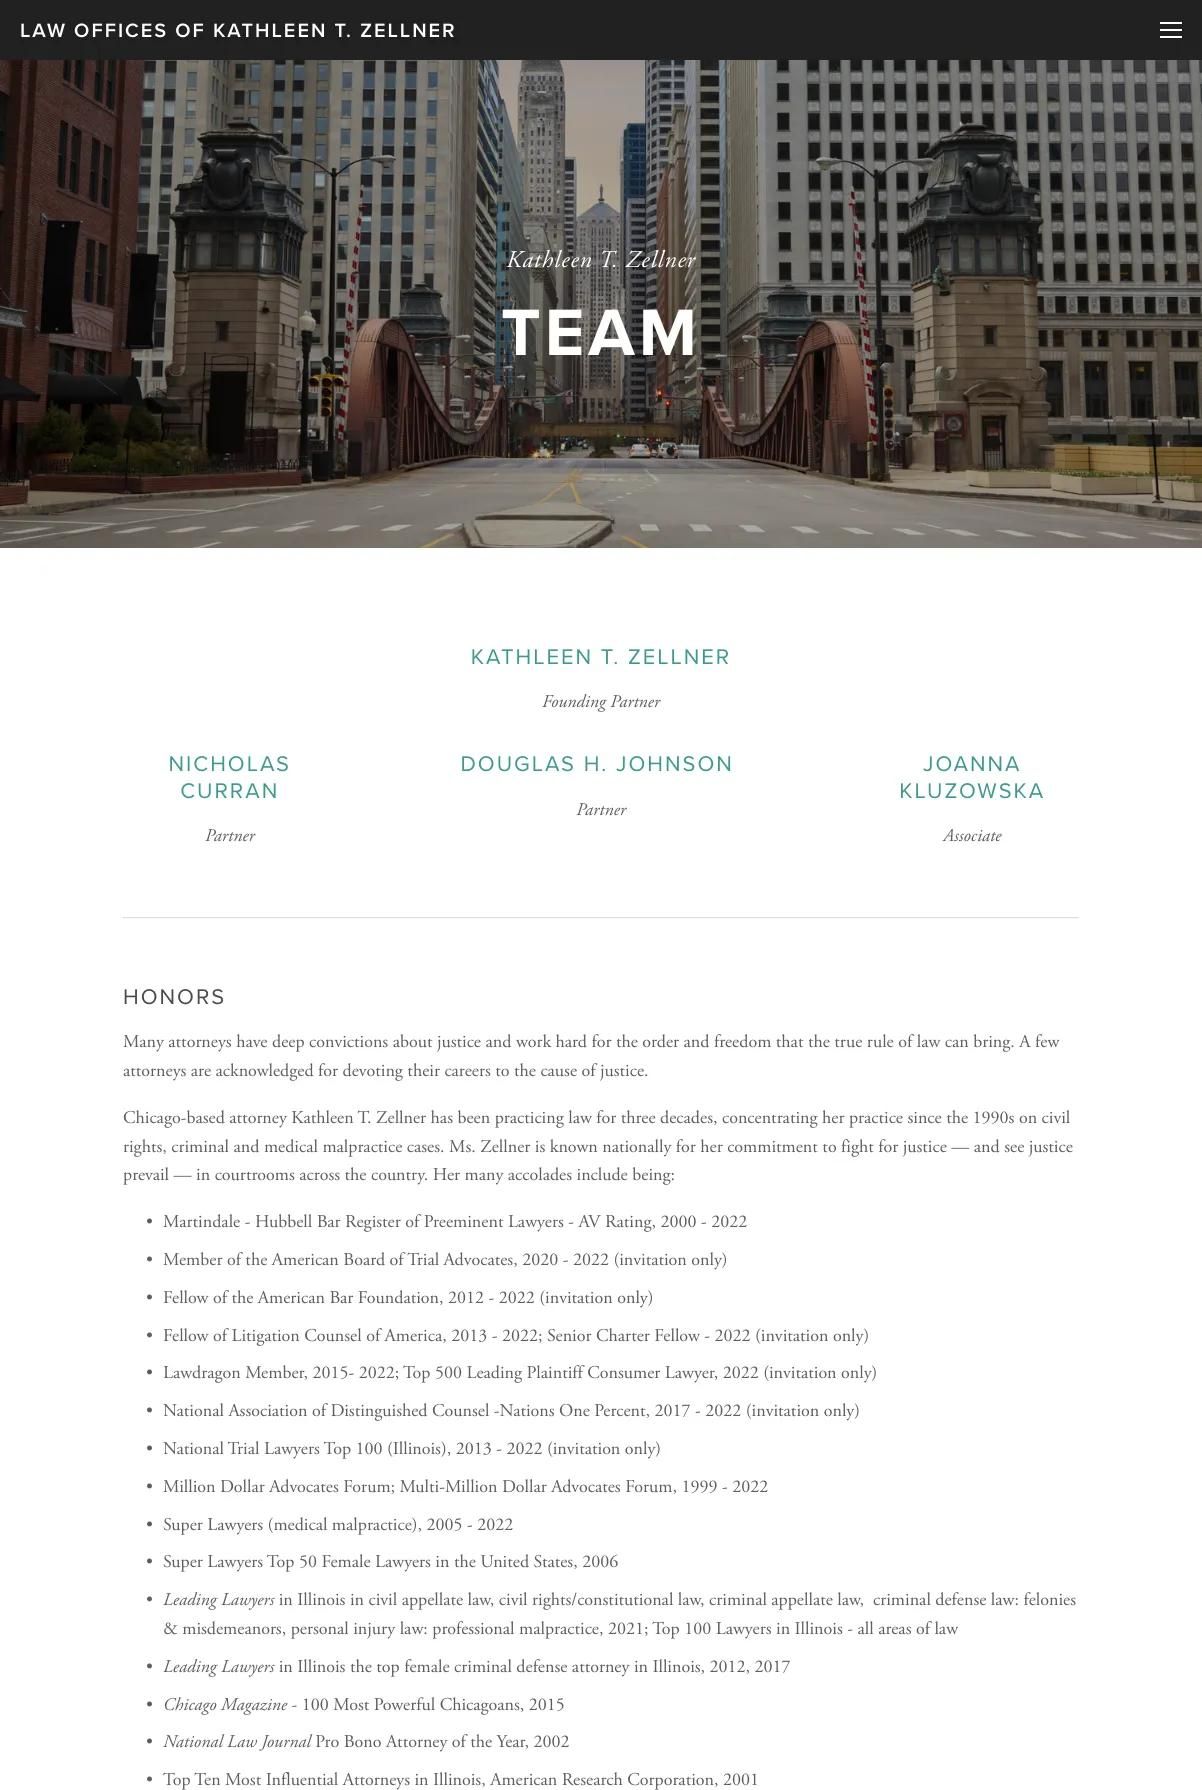 Screenshot 3 of Law Offices of Kathleen T. Zellner & Associates (Example Squarespace Law Firm Website)